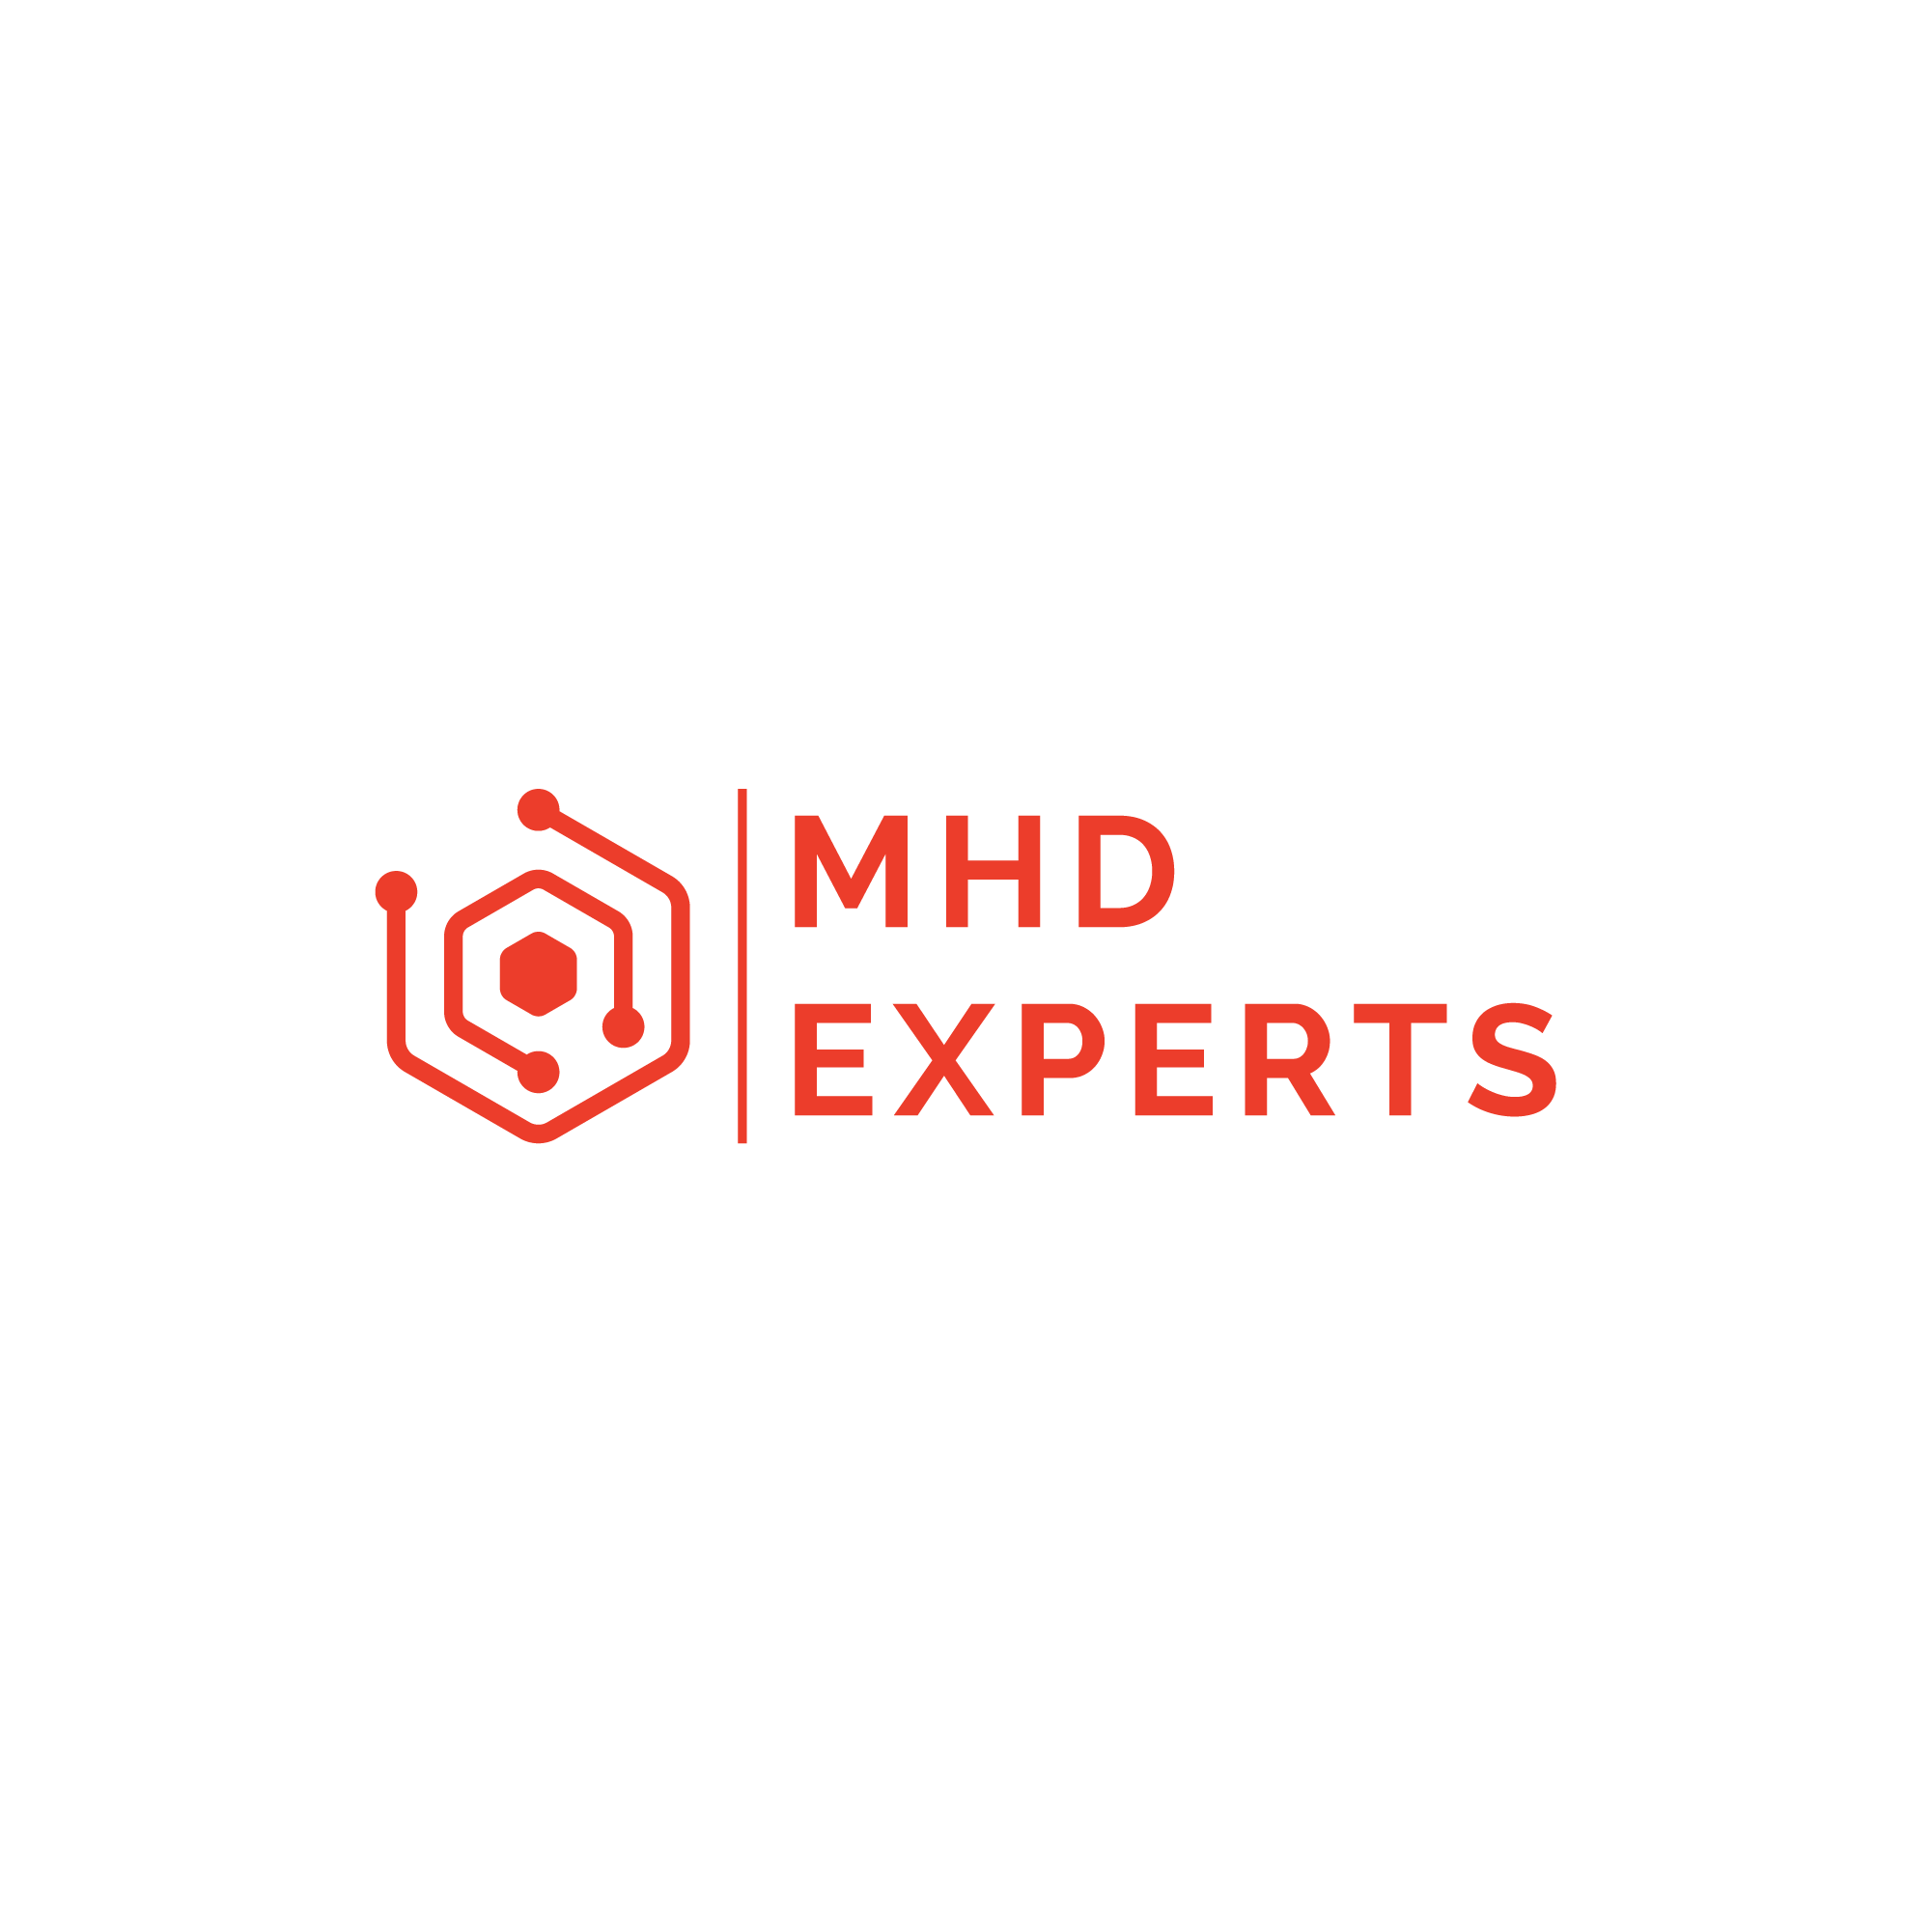 MHD Experts